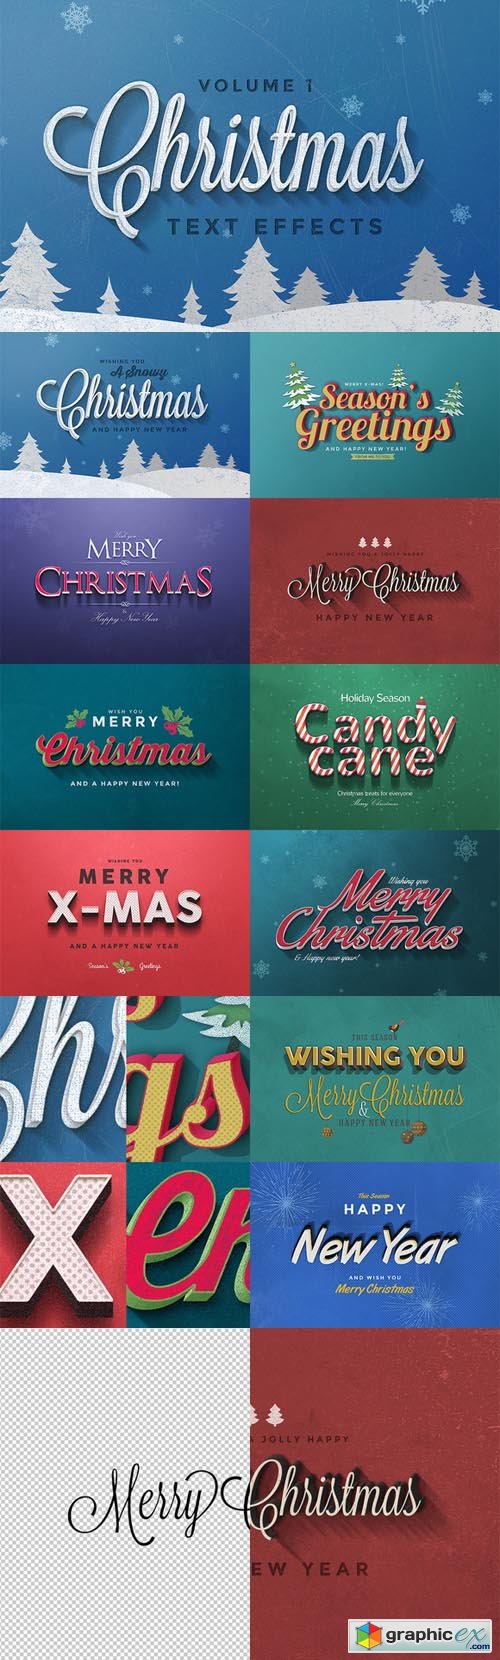 Christmas Text Effects Vol.1